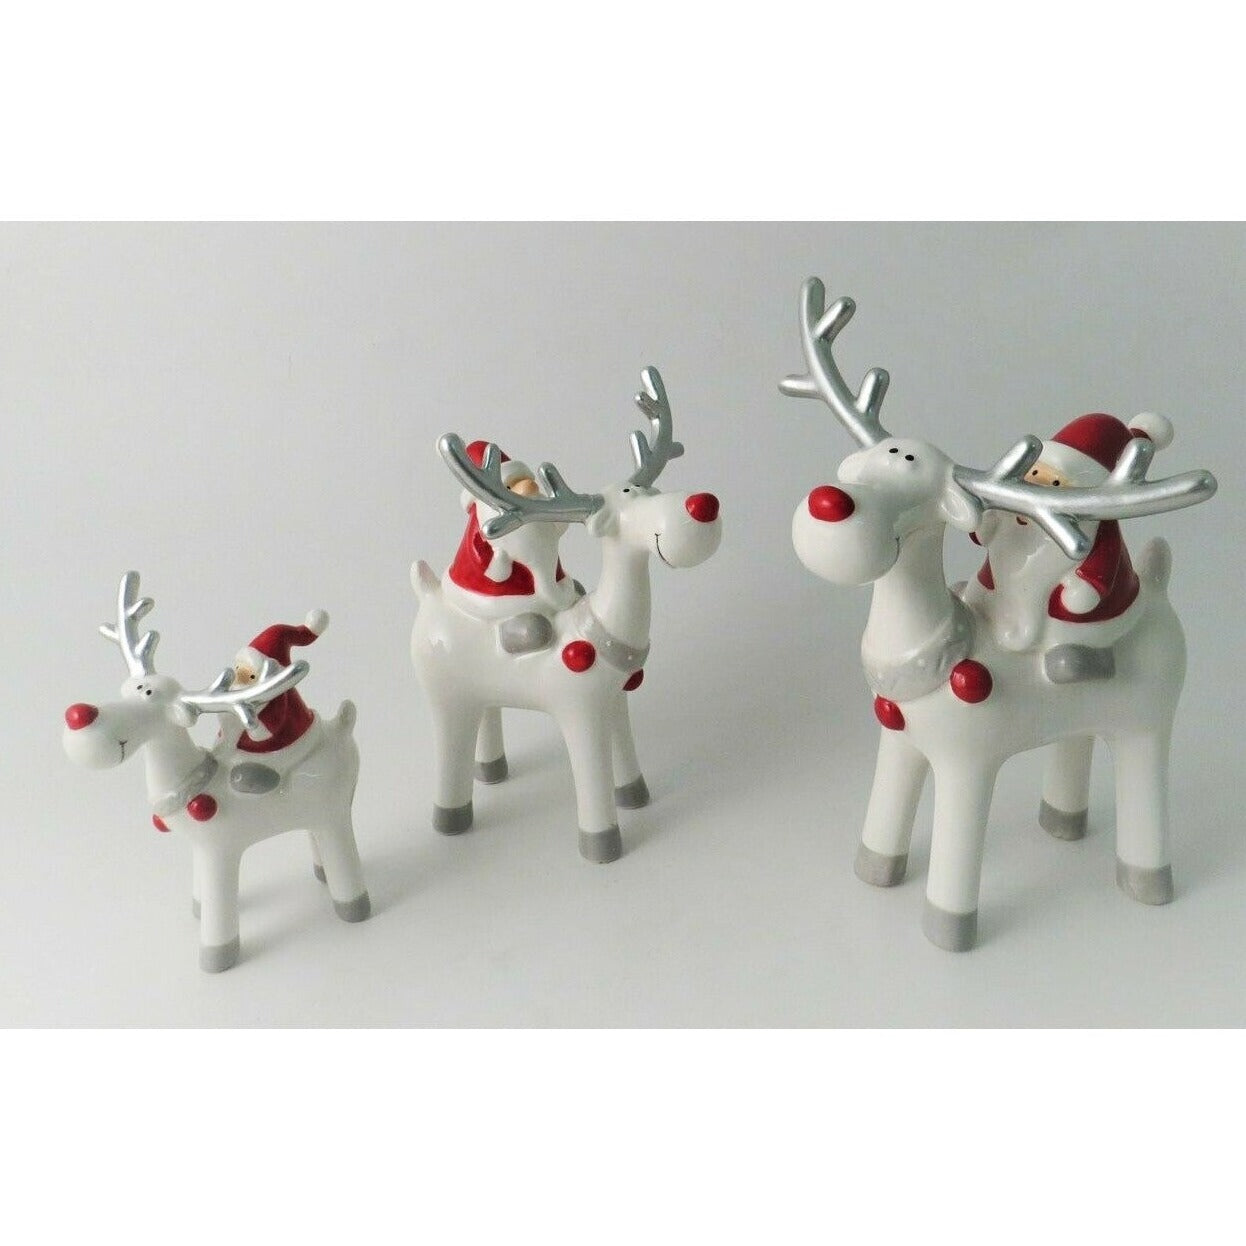 Ceramic Santa Riding Reindeer with Red Nose and Silver Antlers